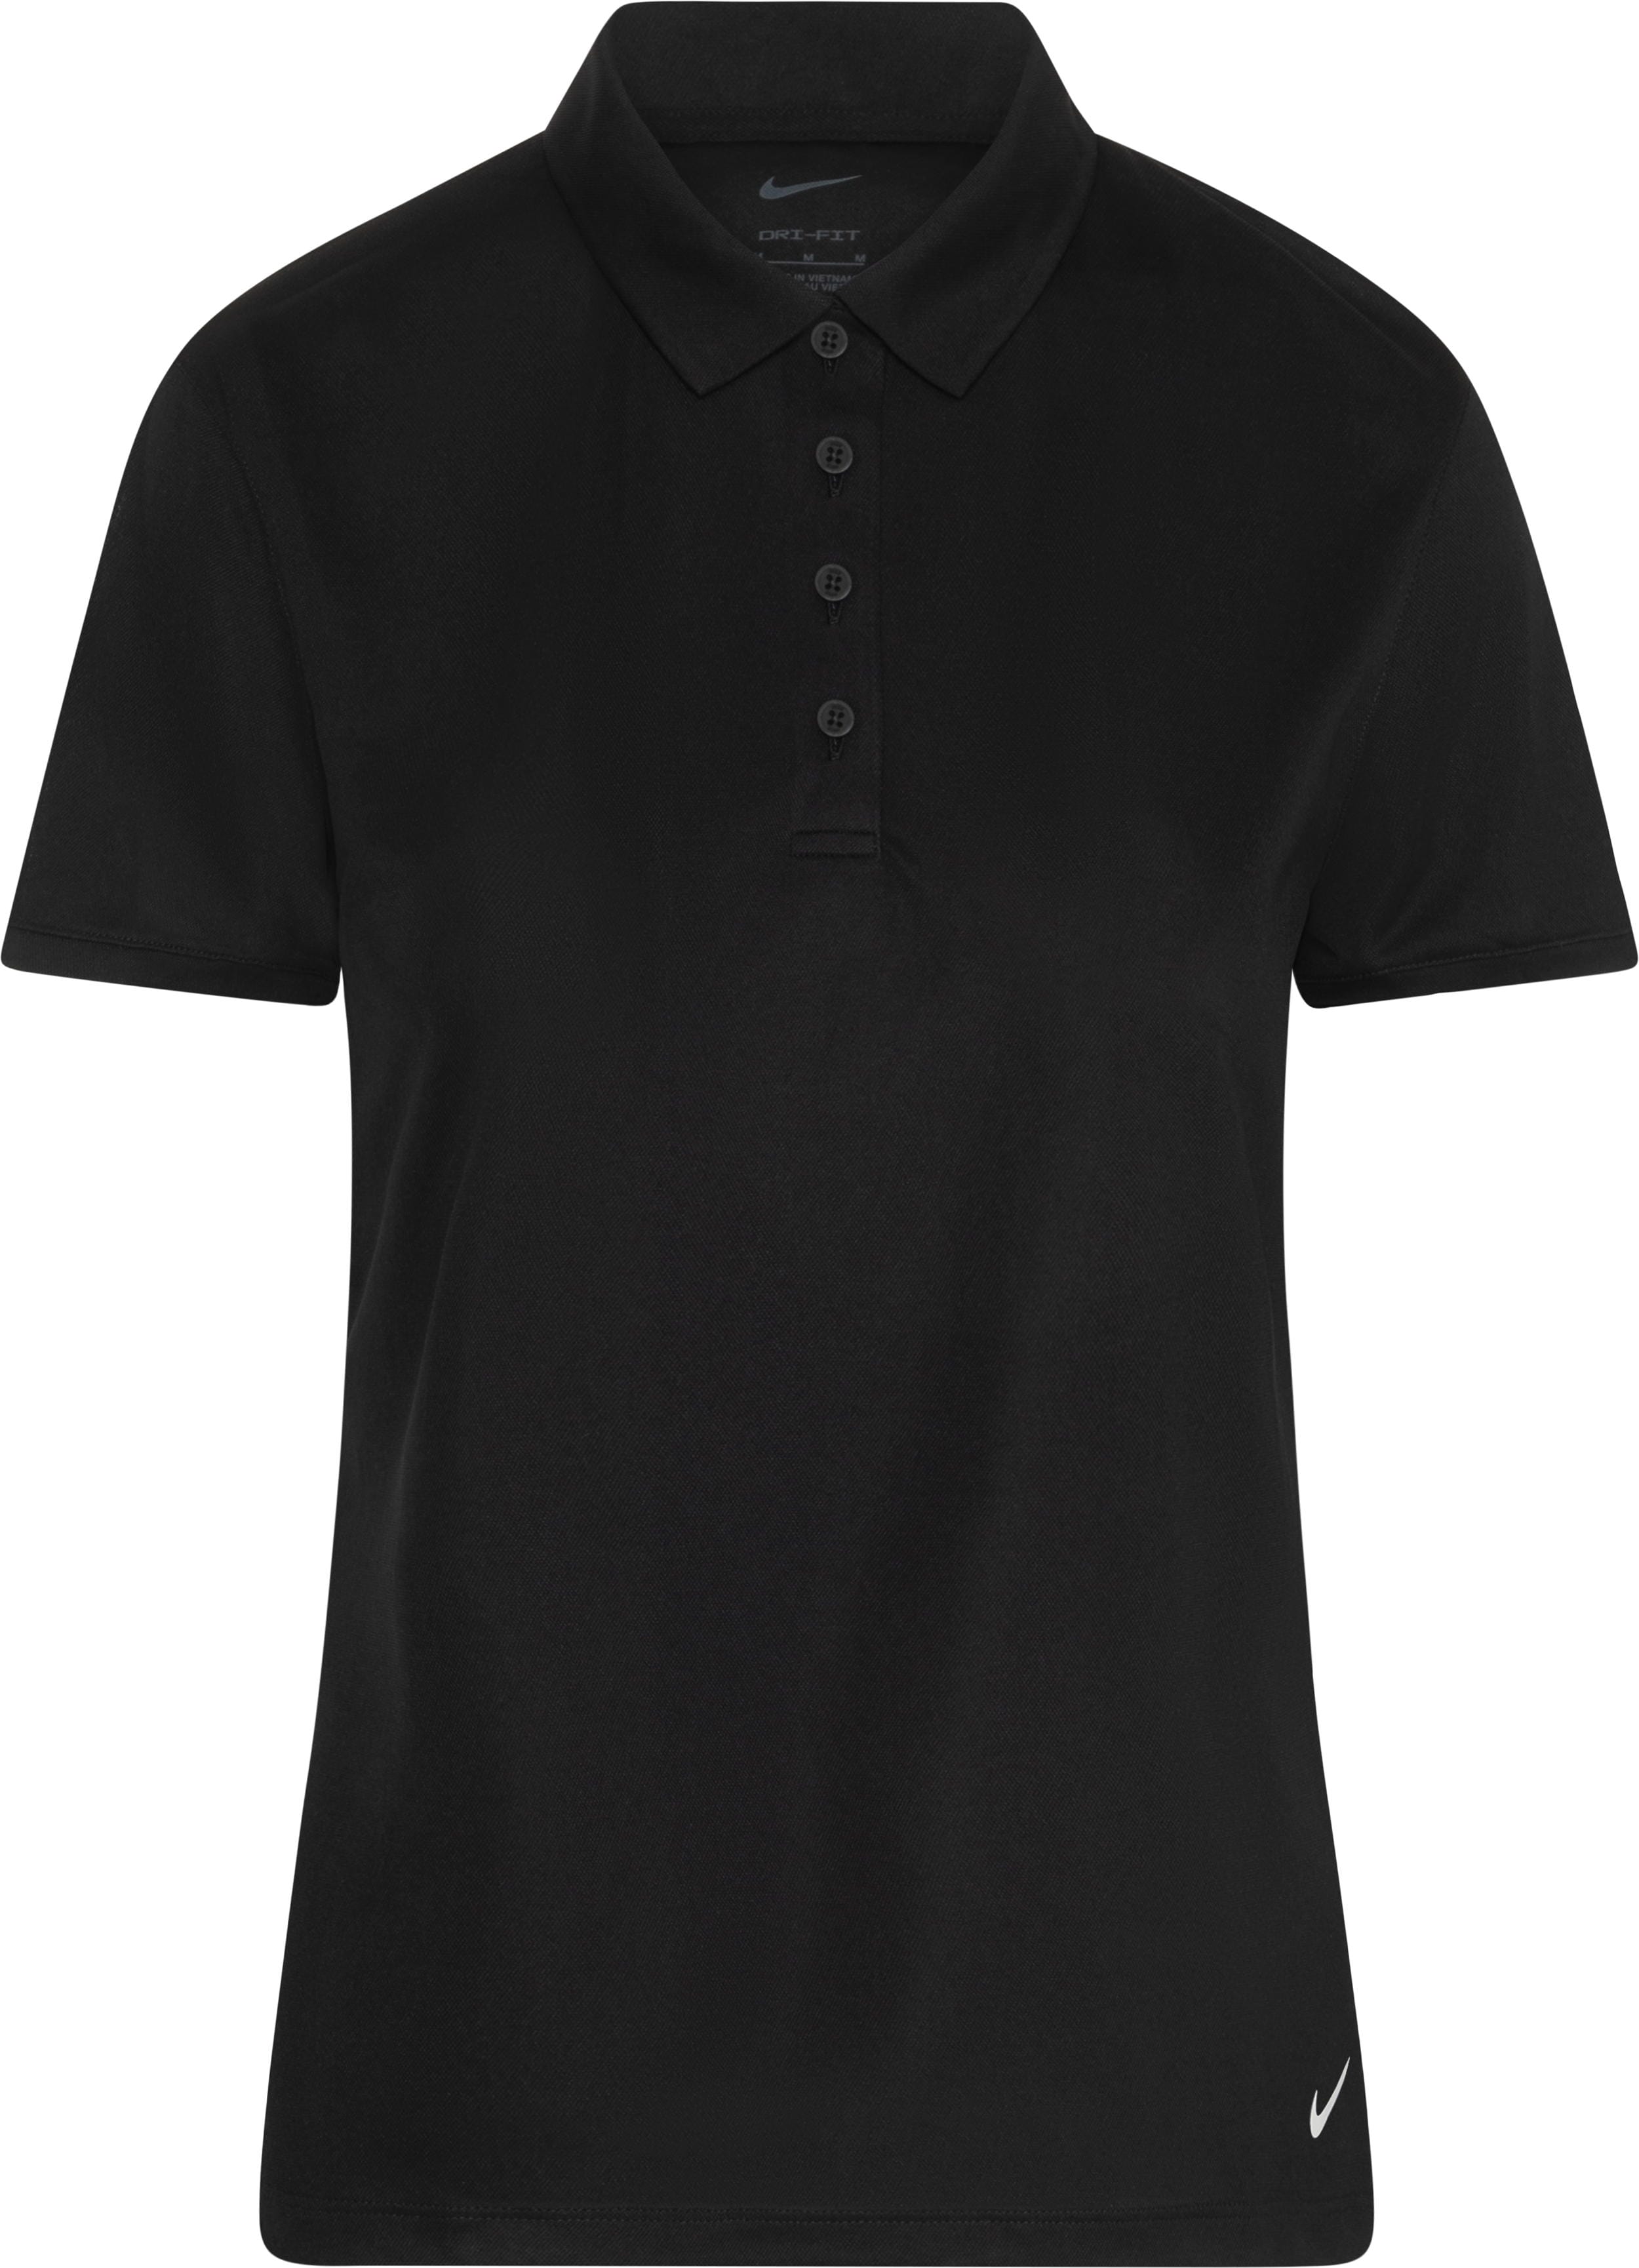 Nike Dri-Fit Victory SS Solid Polo, black/white